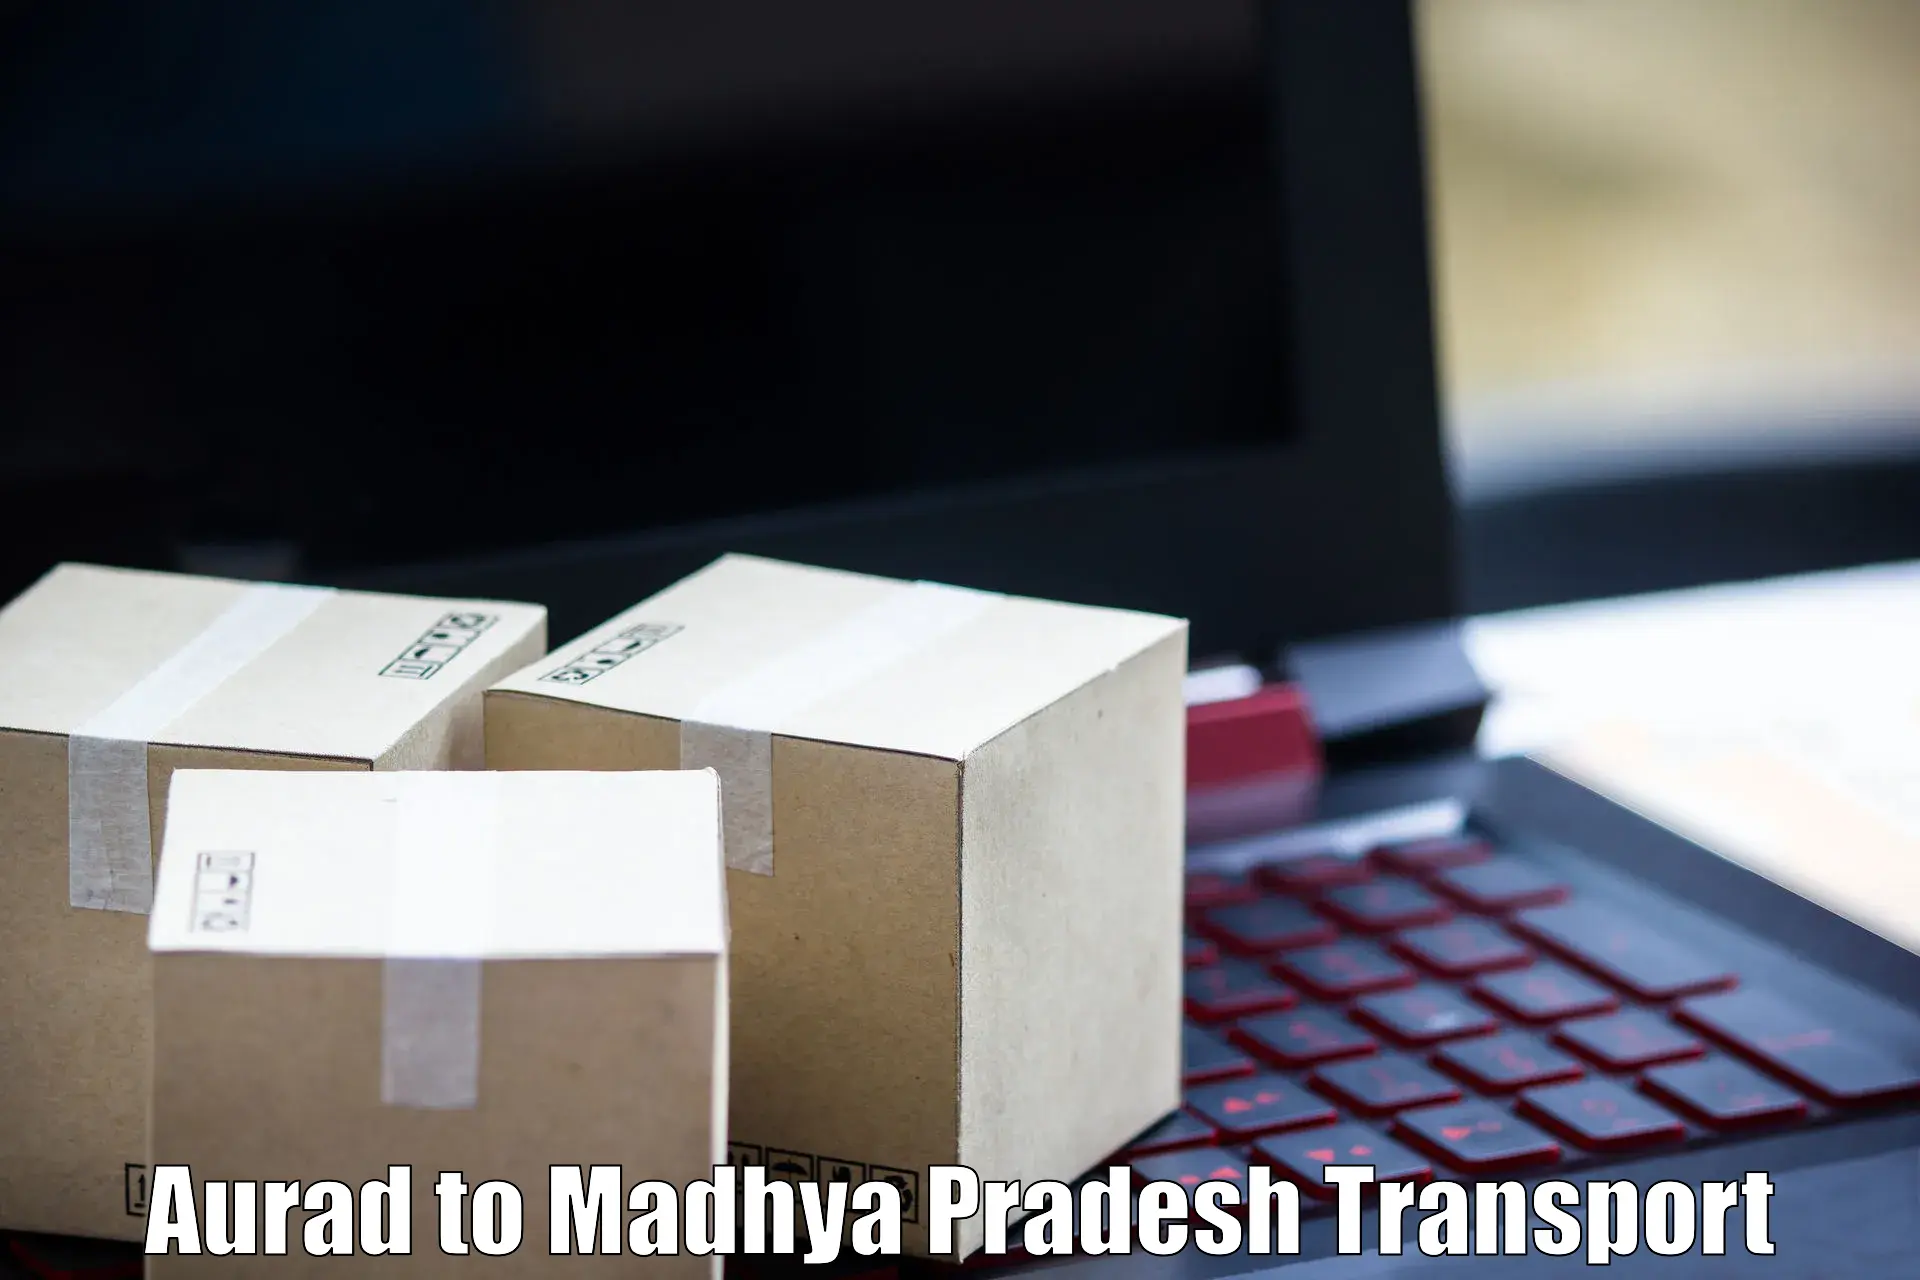 Package delivery services Aurad to Madhya Pradesh